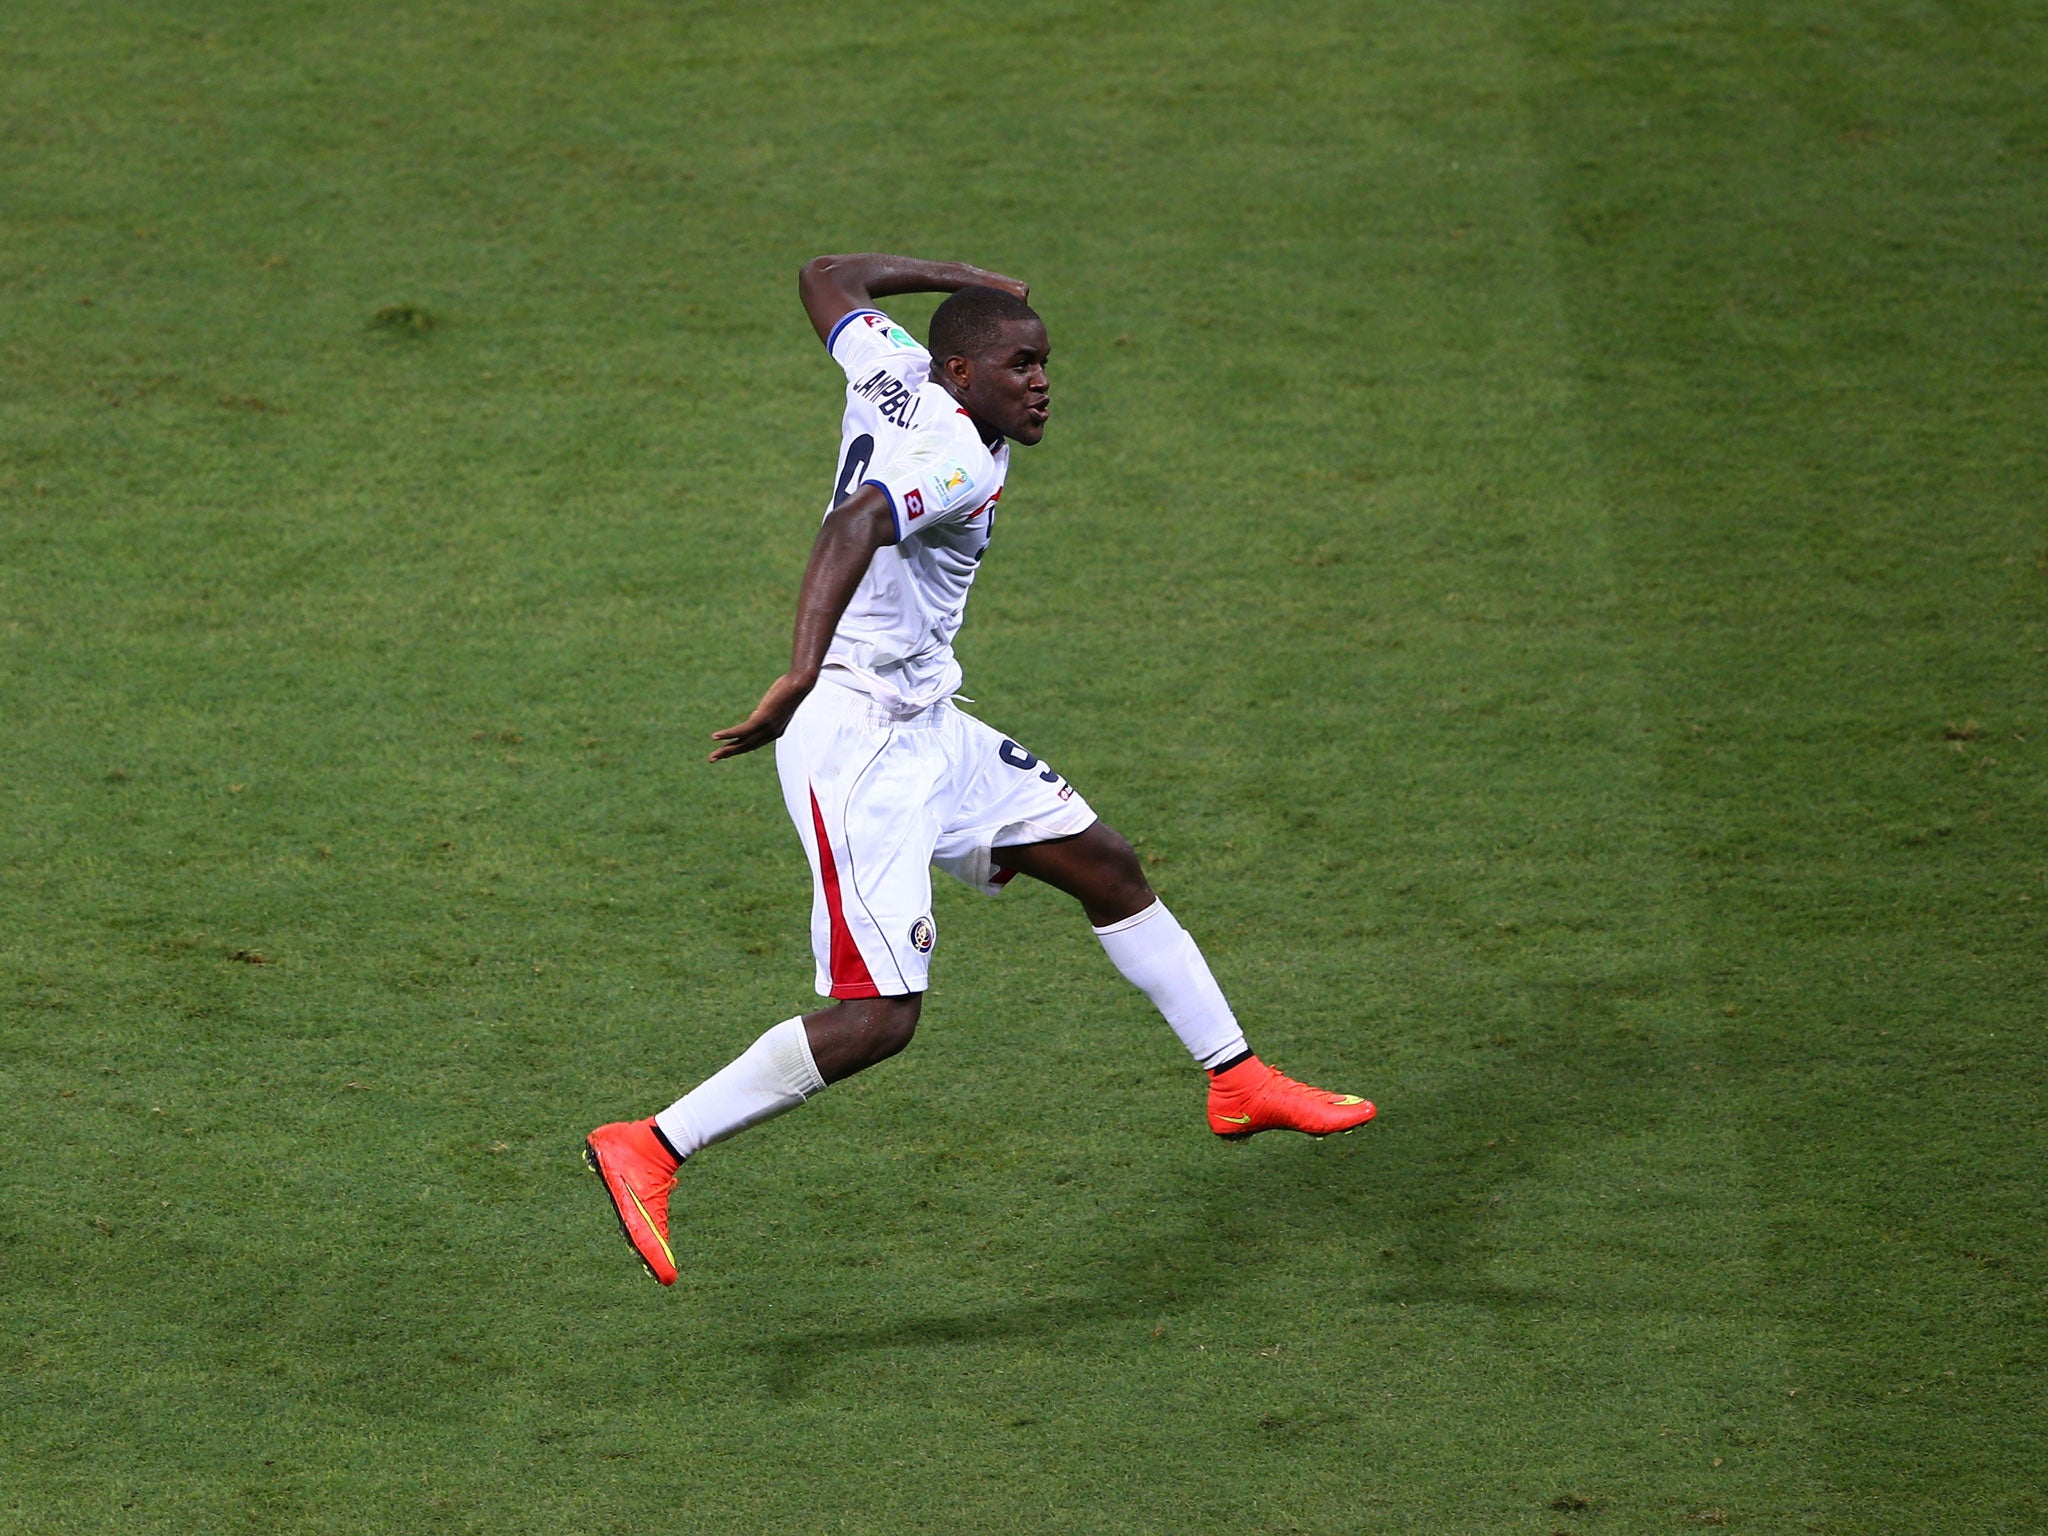 Joel Campbell celebrating after scoring for Costa Rica in the 3-1 win over Uruguay in the 2014 World Cup